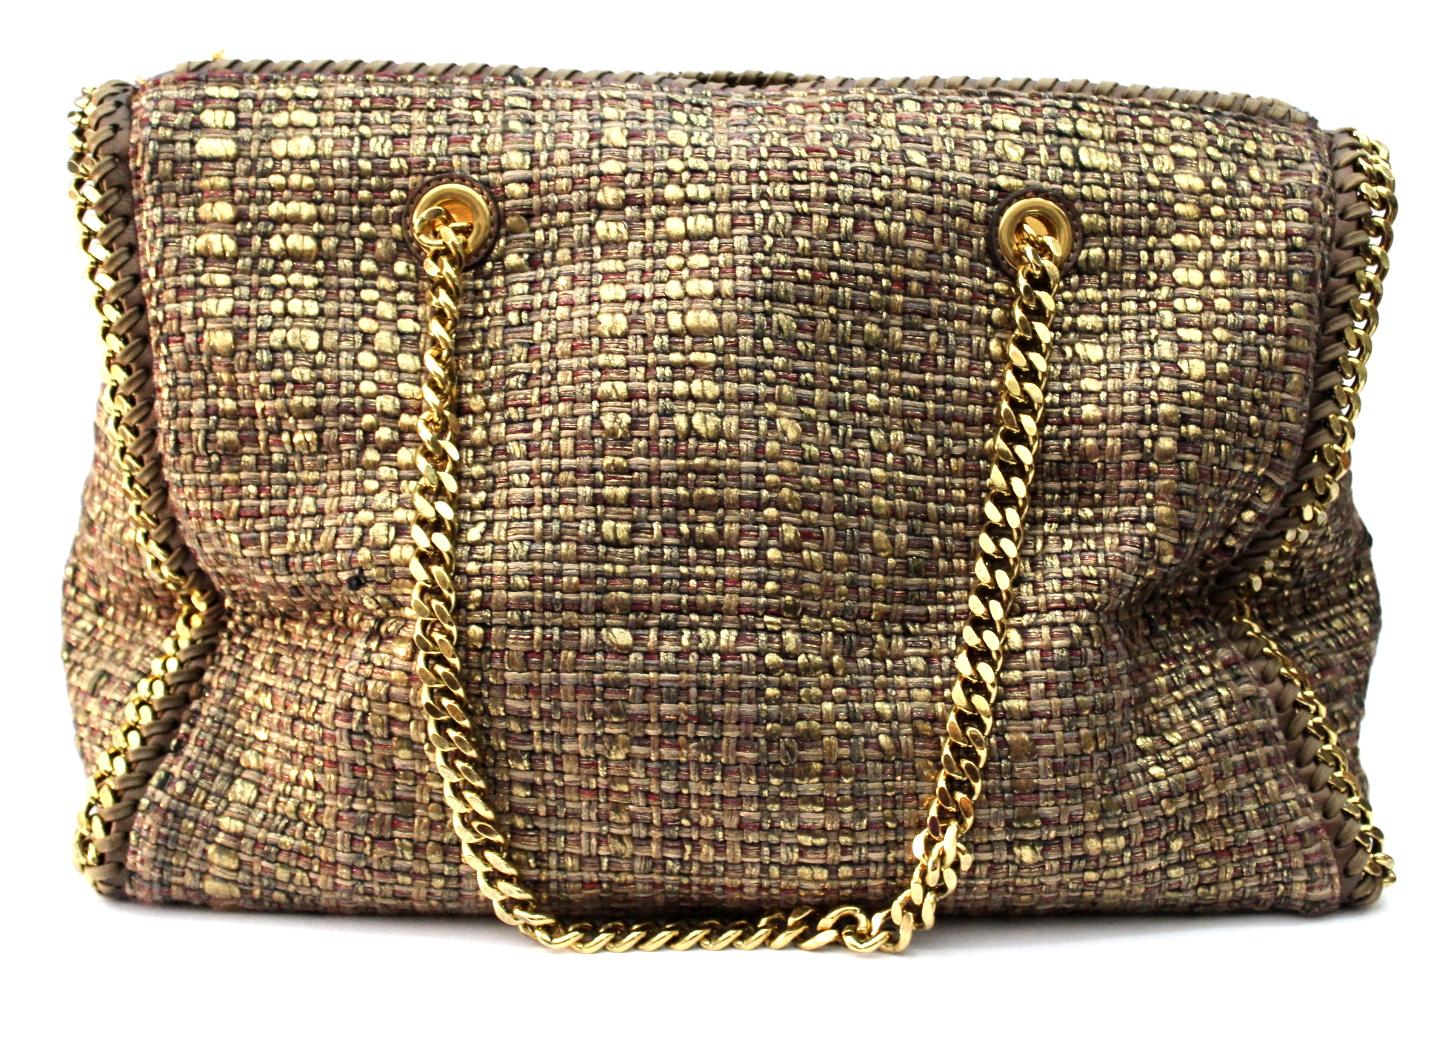 This particular Falabella is crafted out of a unique Boucle woven fabric with metallic threading.